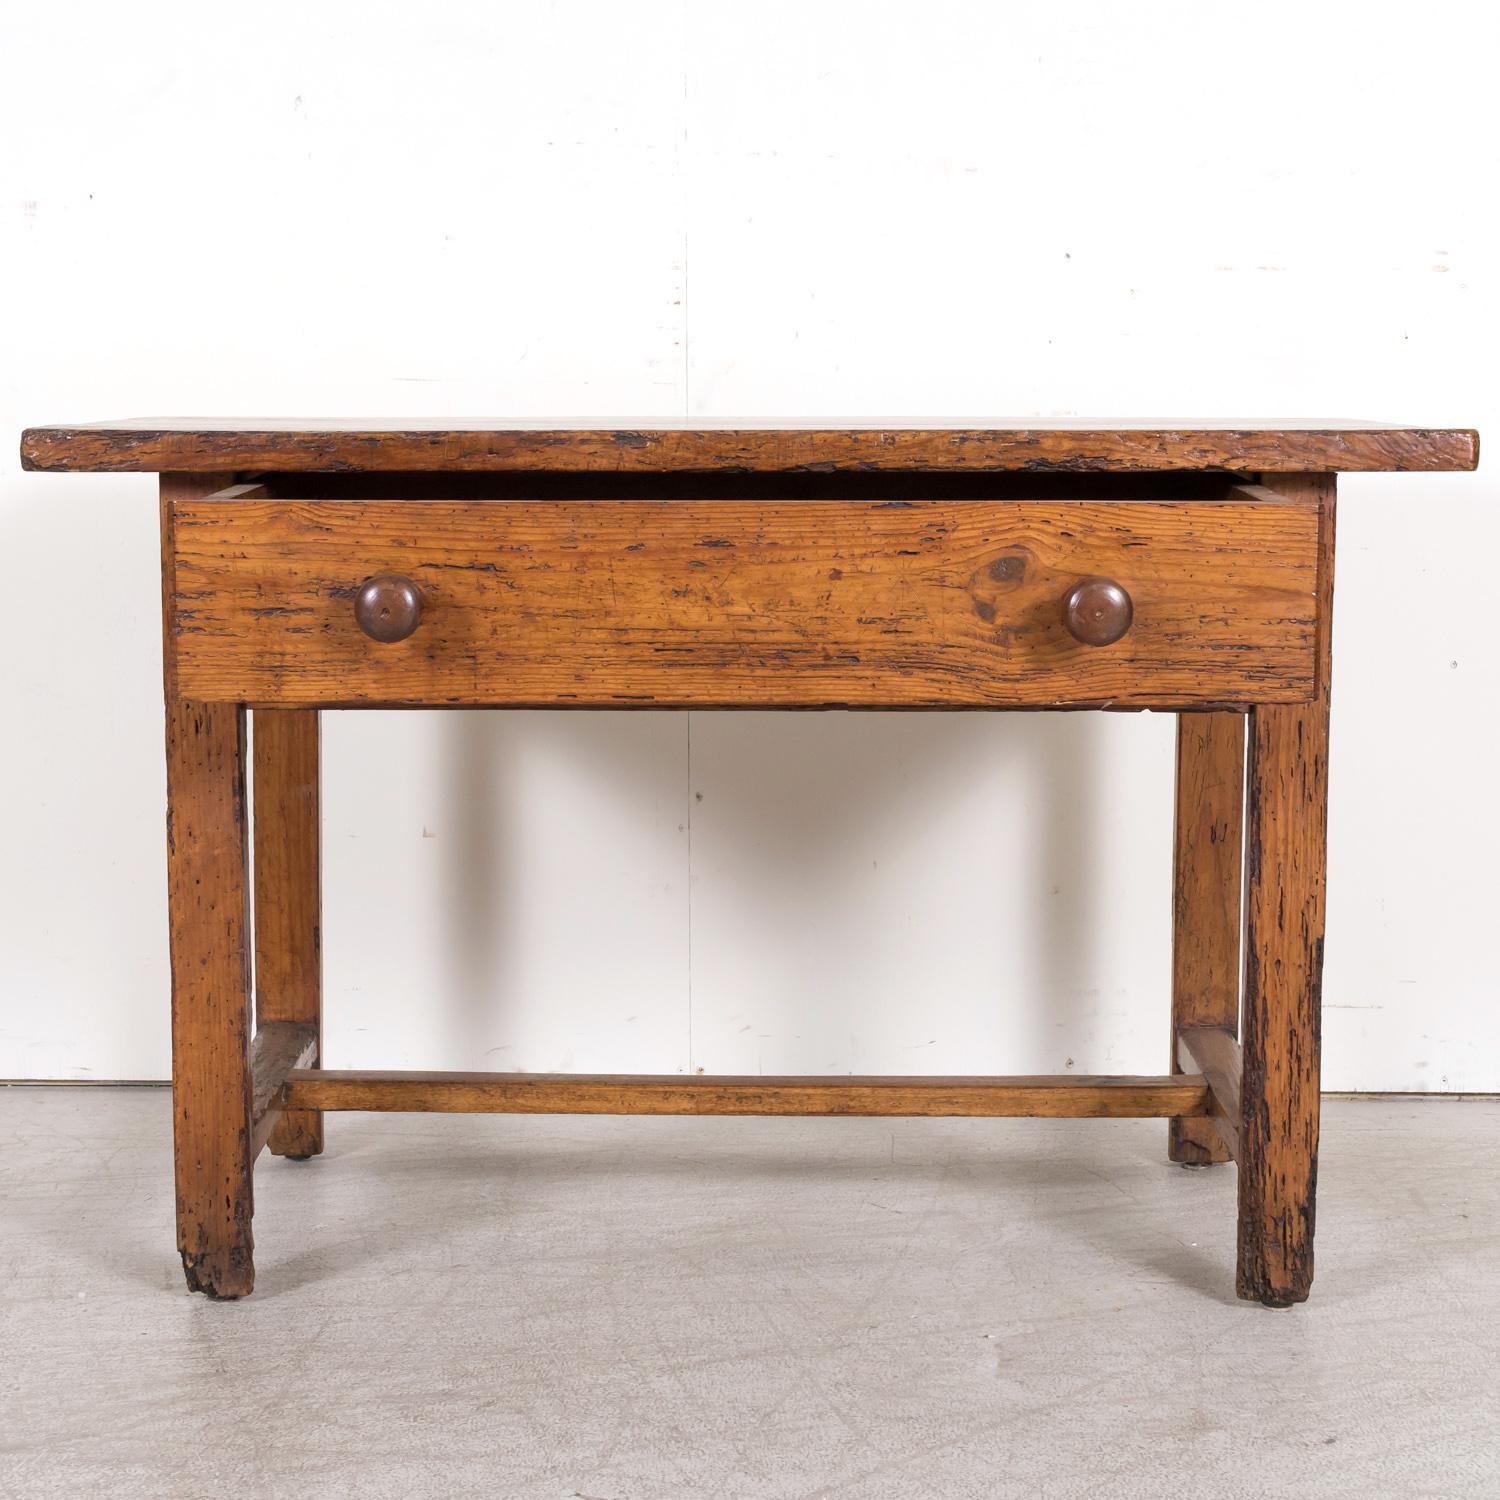 18th Century French Provincial Primitive Larch Wood Side Table or Desk with Draw For Sale 2